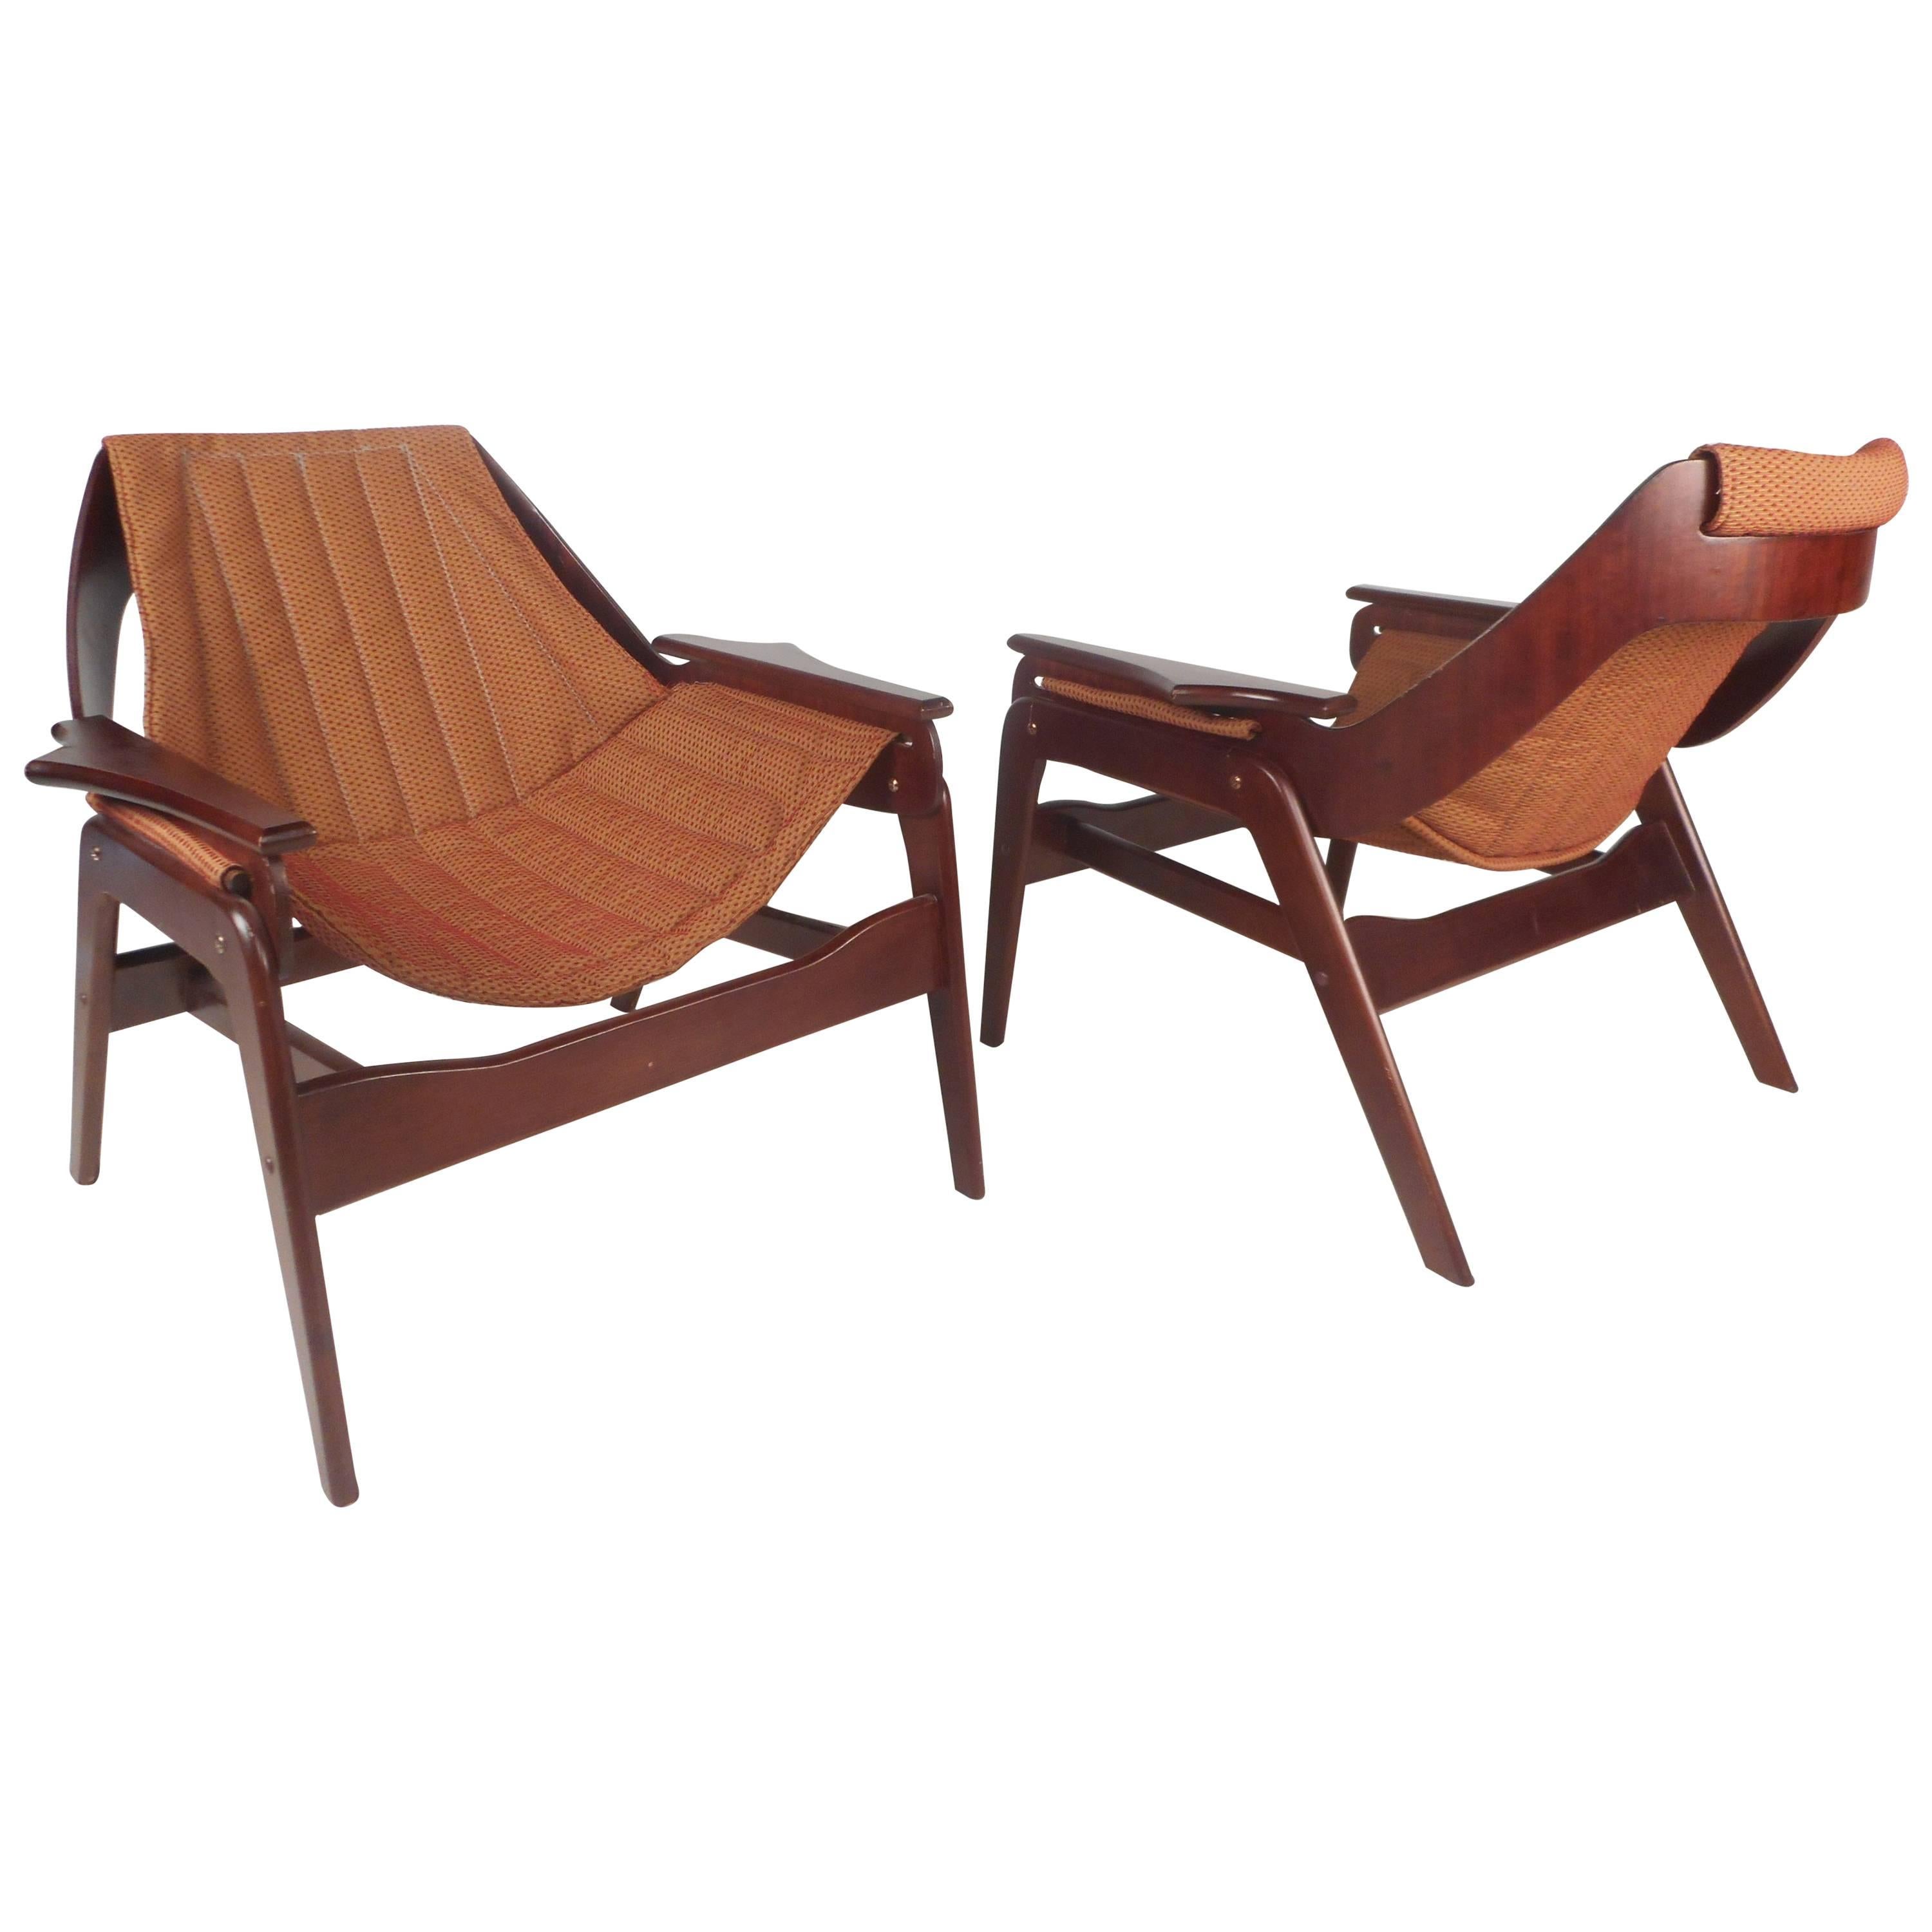 Mid-Century Modern Sling Lounge Chairs by Jerry Johnson